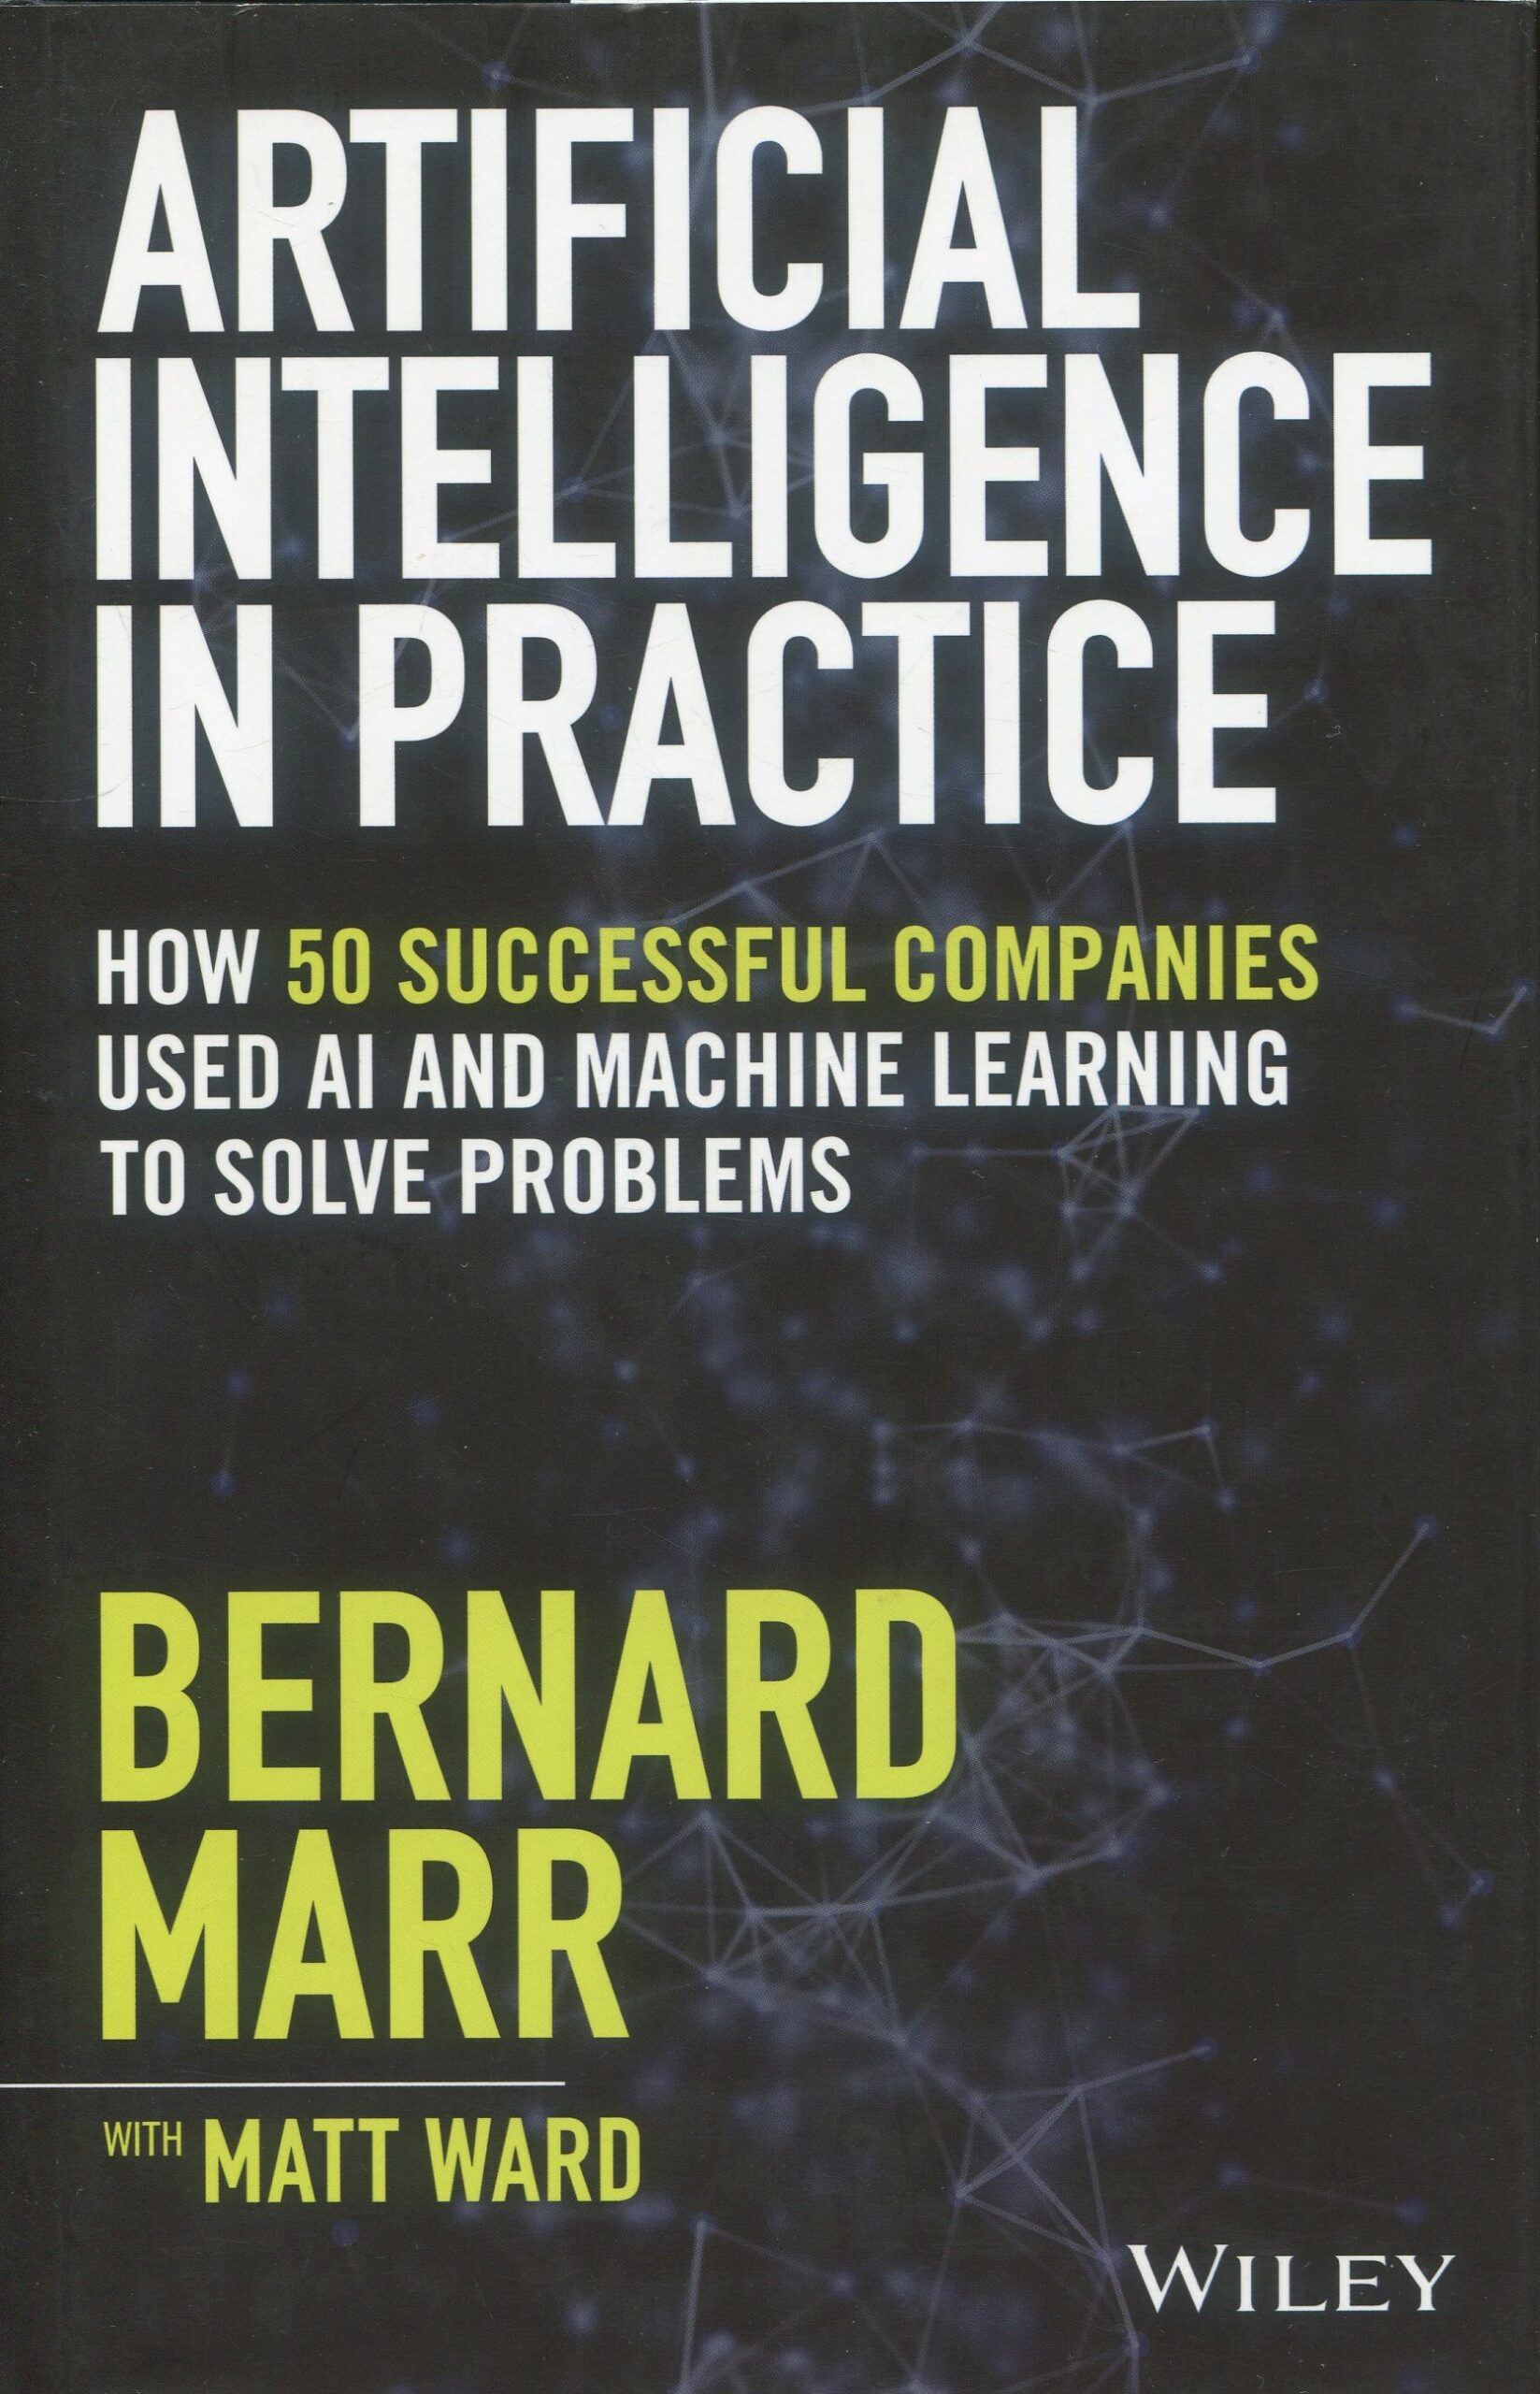 Artificial intelligence in practice / 9781119548218 / B. MARR